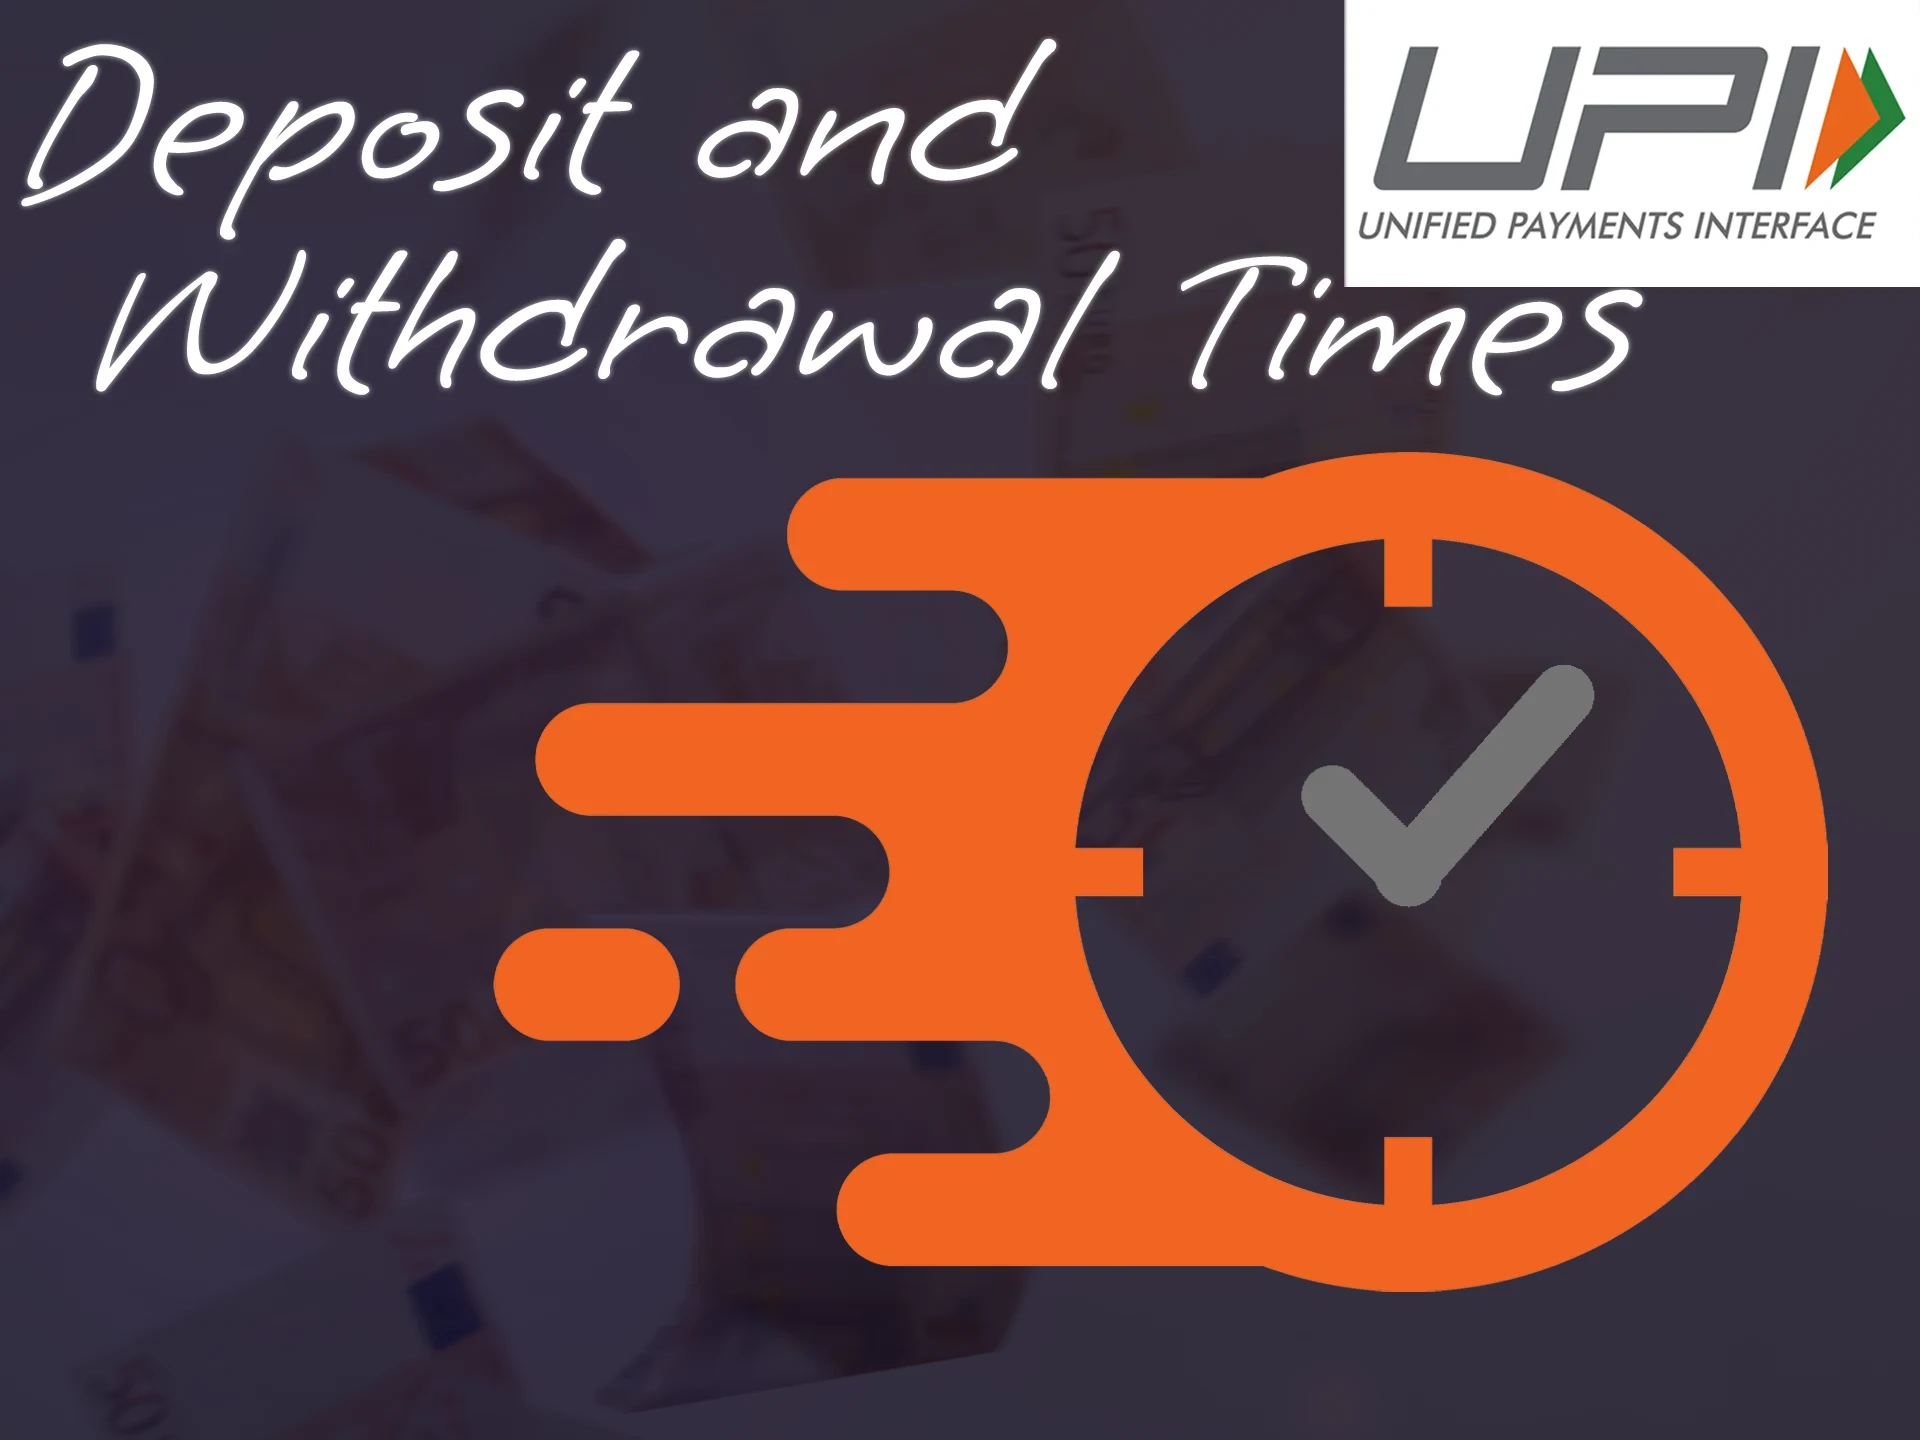 The UPI payment system provides instant transfer of funds.